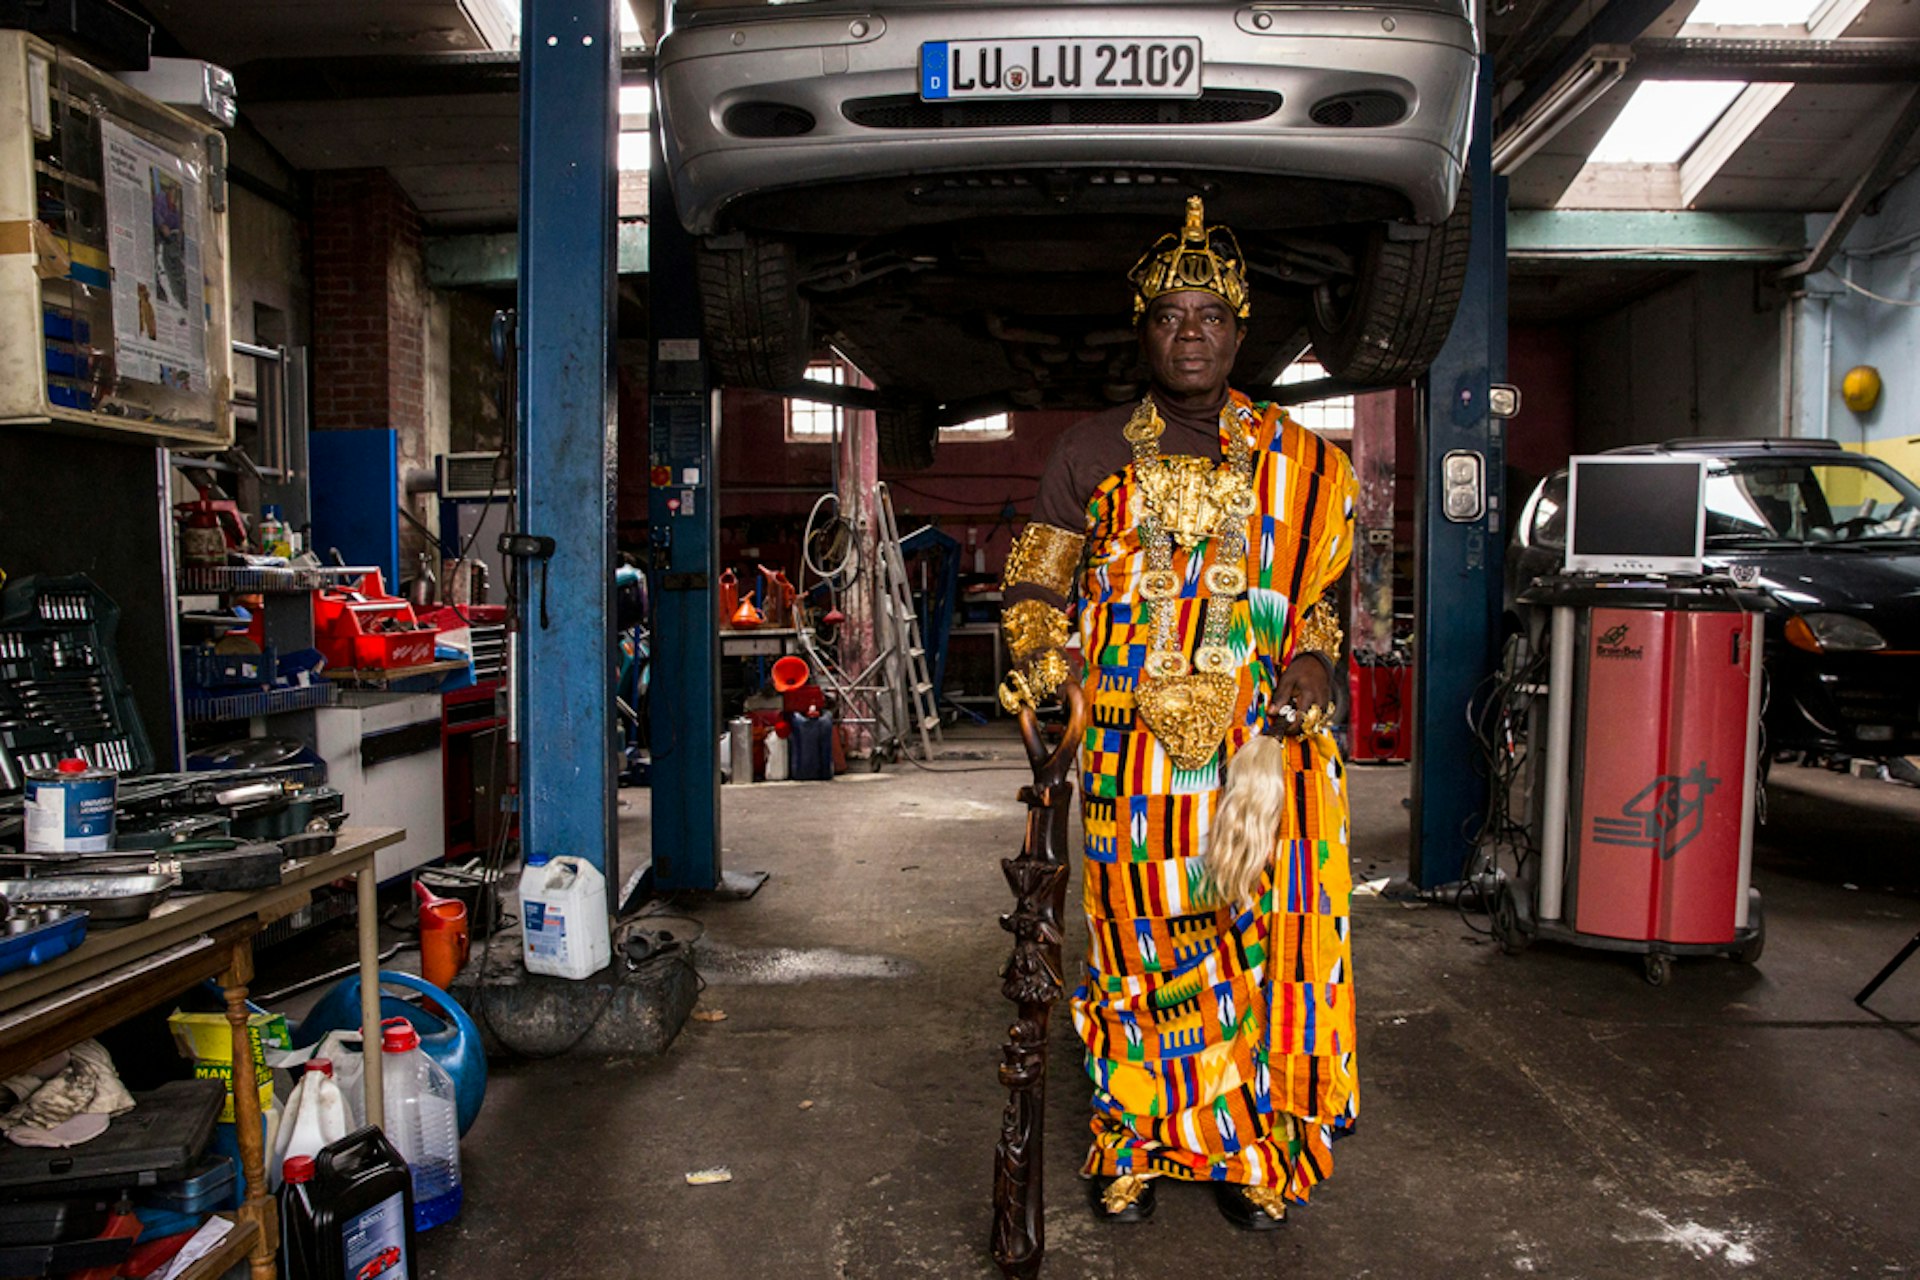 Meet the African chief who leads a double life in Germany